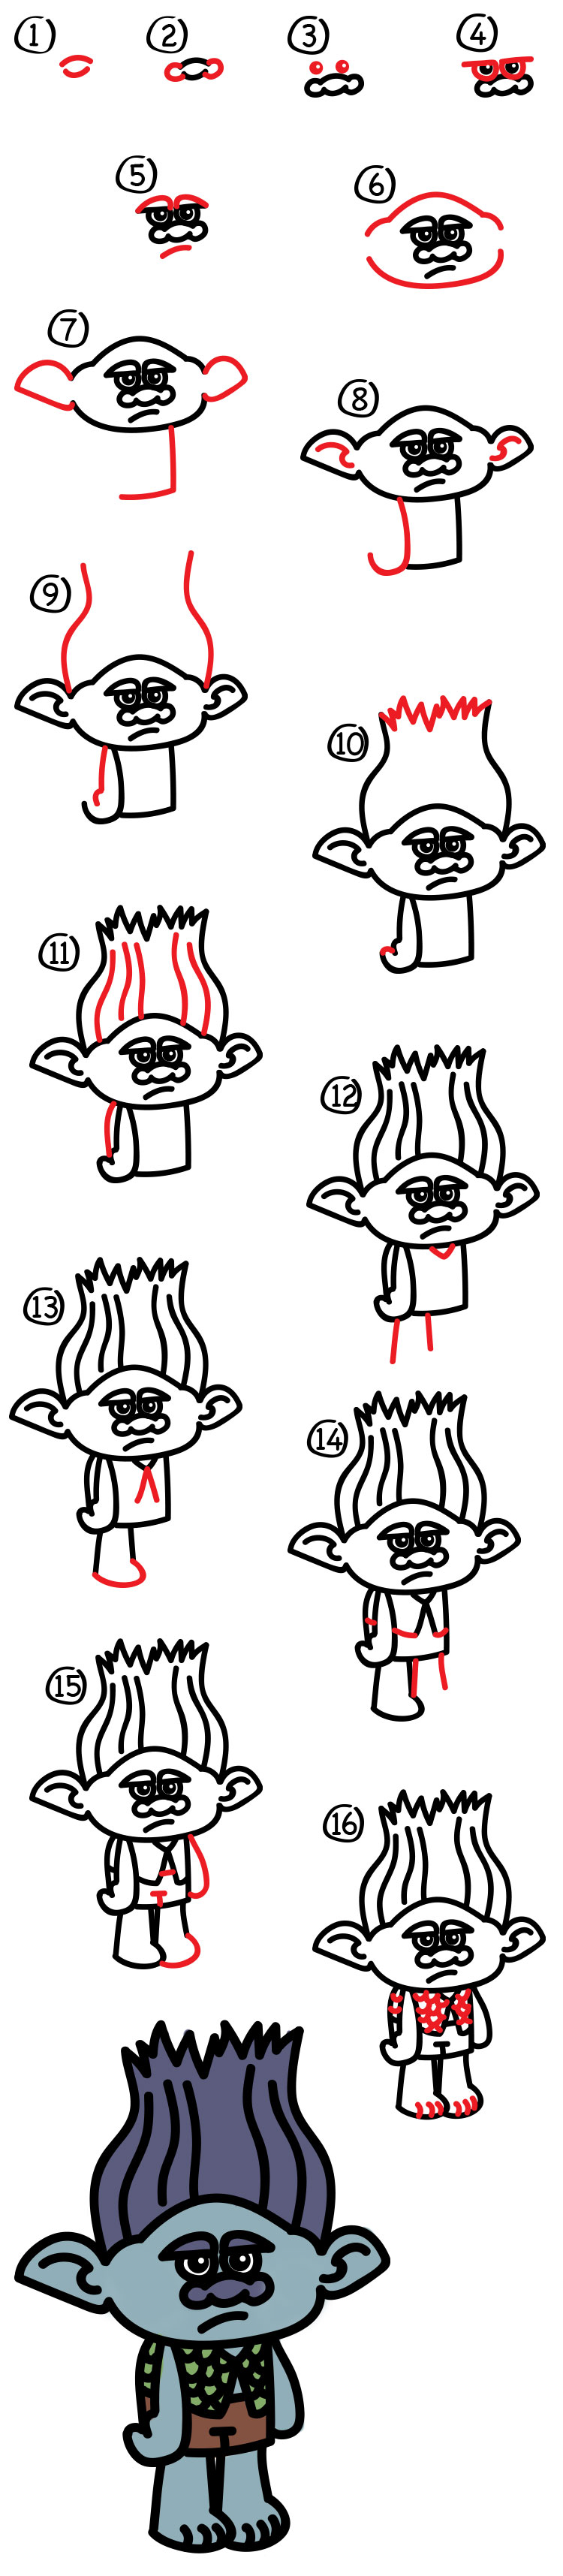 How To Draw Branch From Trolls - Art For Kids Hub -